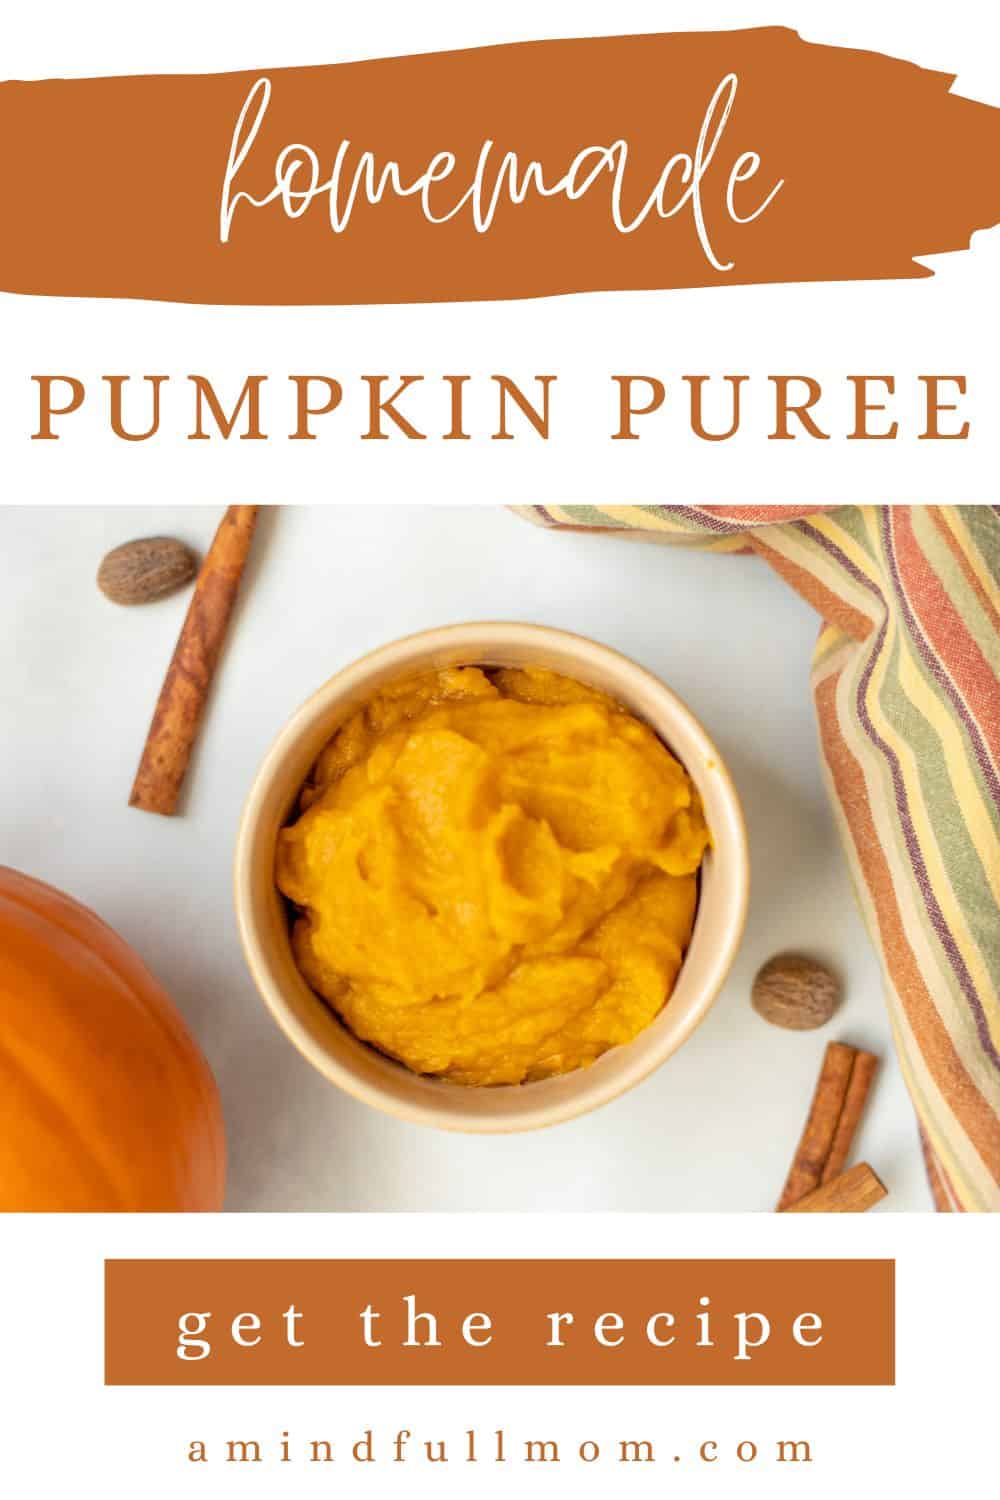 Can't find canned pumpkin? No problem! Use this easy recipe to make your own homemade pumpkin puree. . This recipe results in a smooth pumpkin puree with the most concentrated flavor and is perfect for any recipe that calls for canned pumpkin puree.  Directions for Instant Pot Pumpkin Puree as well. 